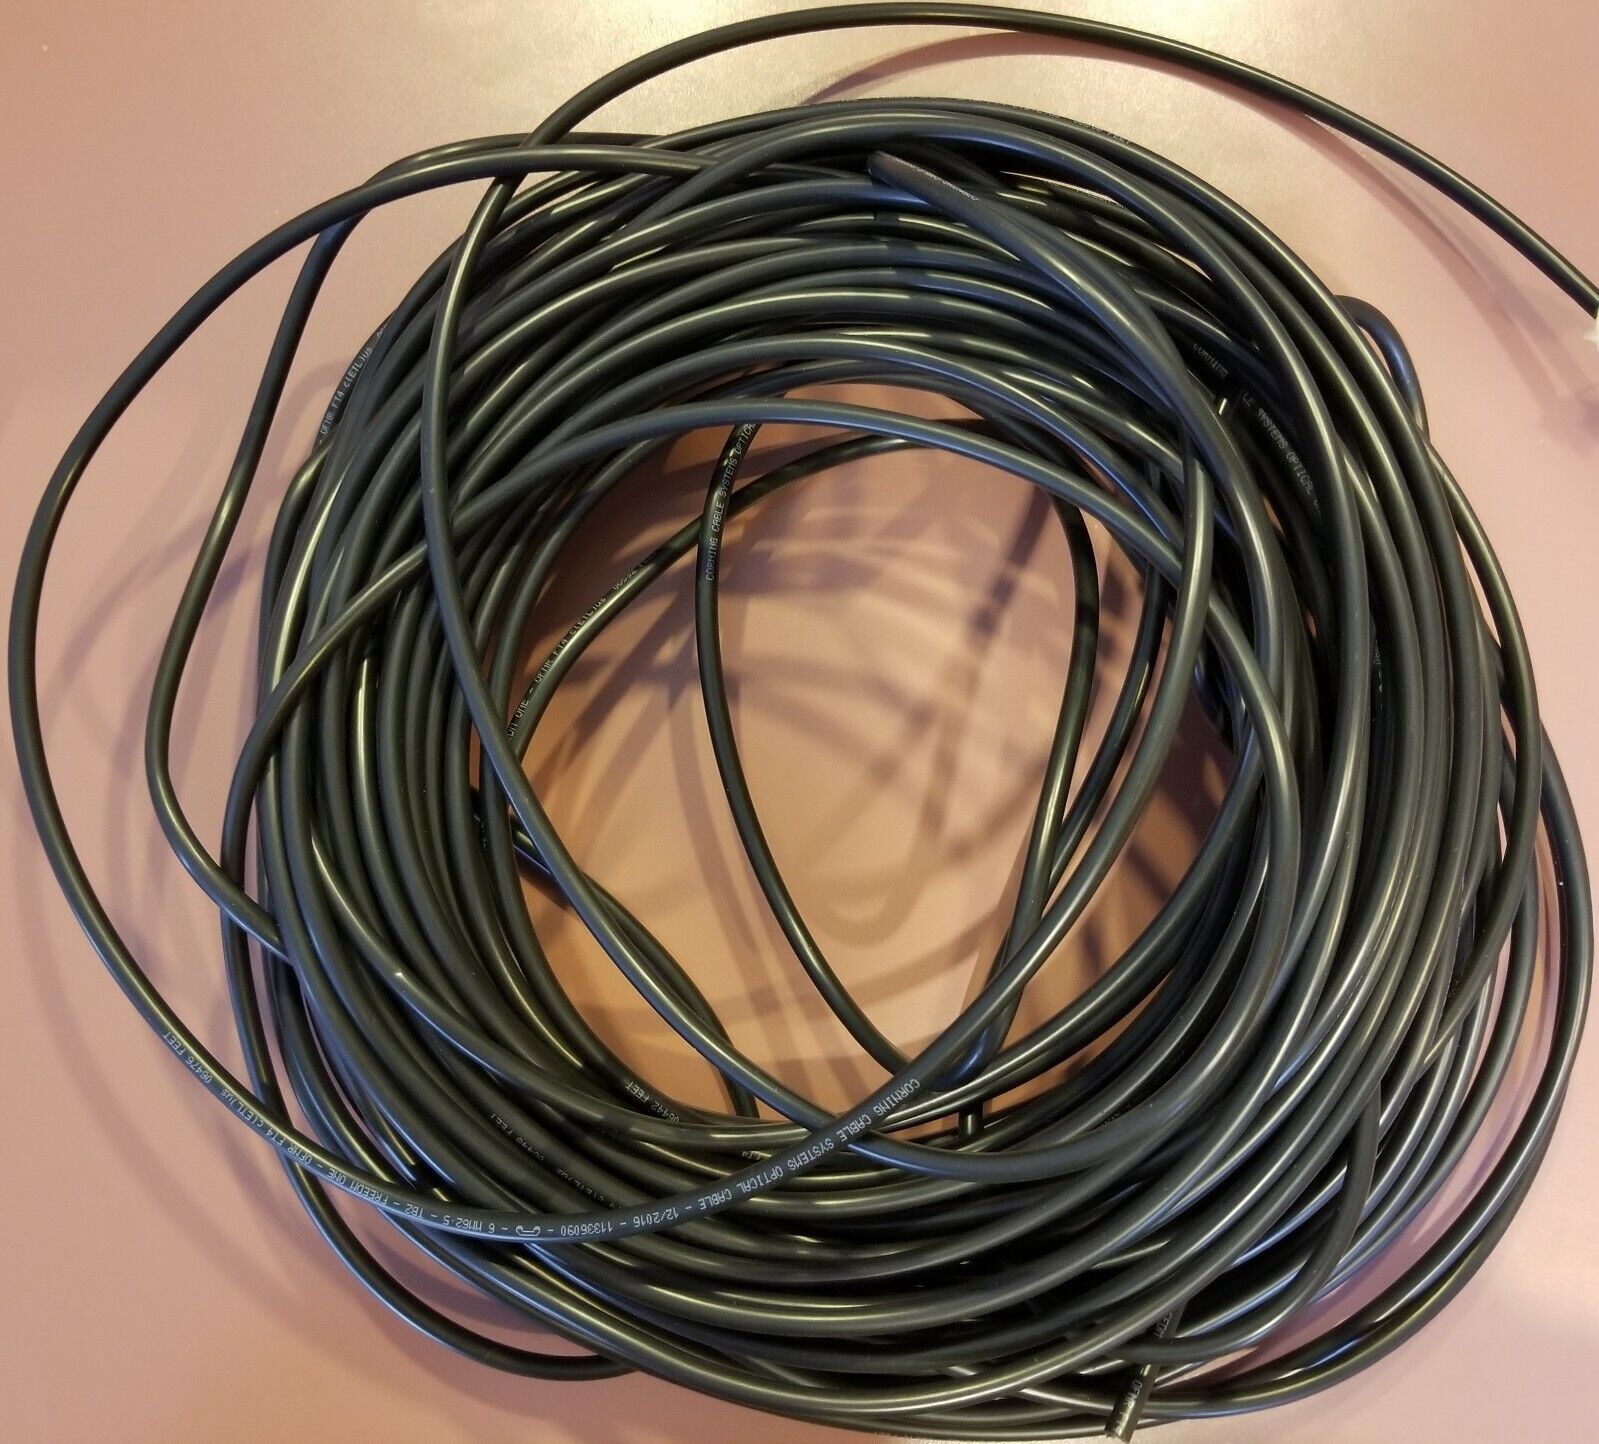 20 METER CORNING OPTICAL CABLE #11336090  -6 MM62;5 TB2 FREEDOM ONE  OFNR FT4